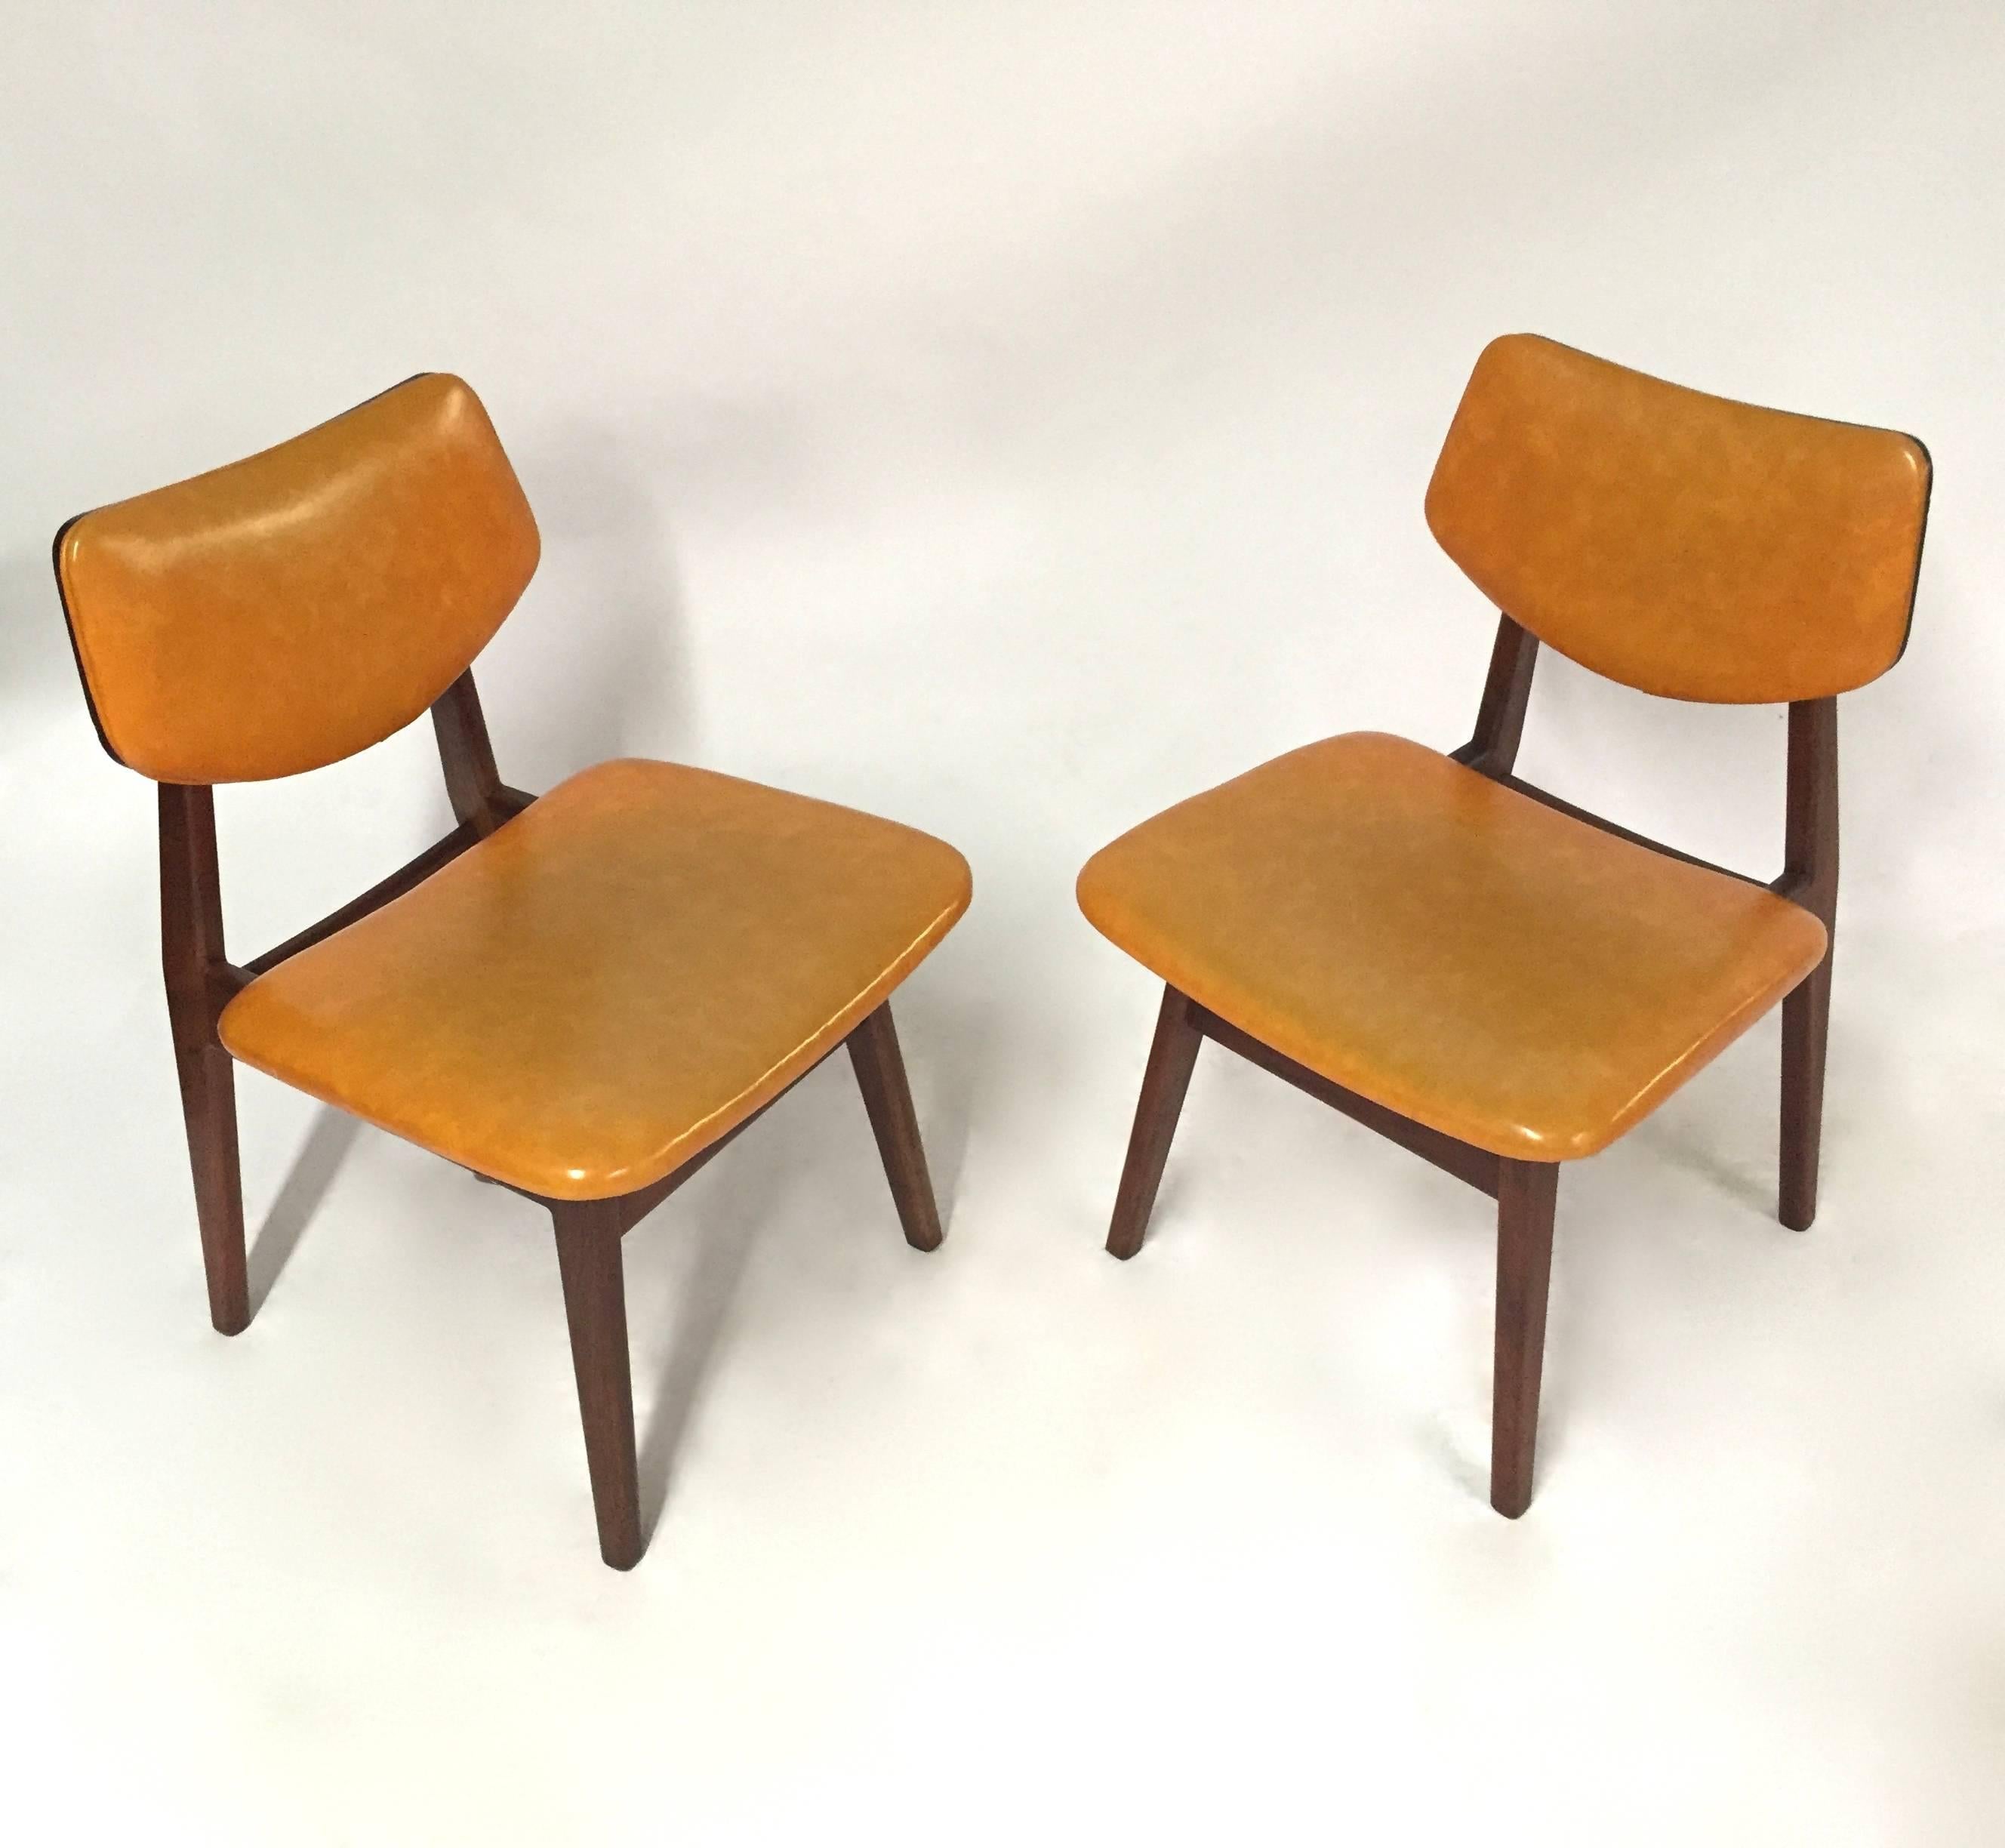 Pair of chairs by Jens Risom have angular walnut frames with floating tapered seat and back covered in original caramel vinyl.